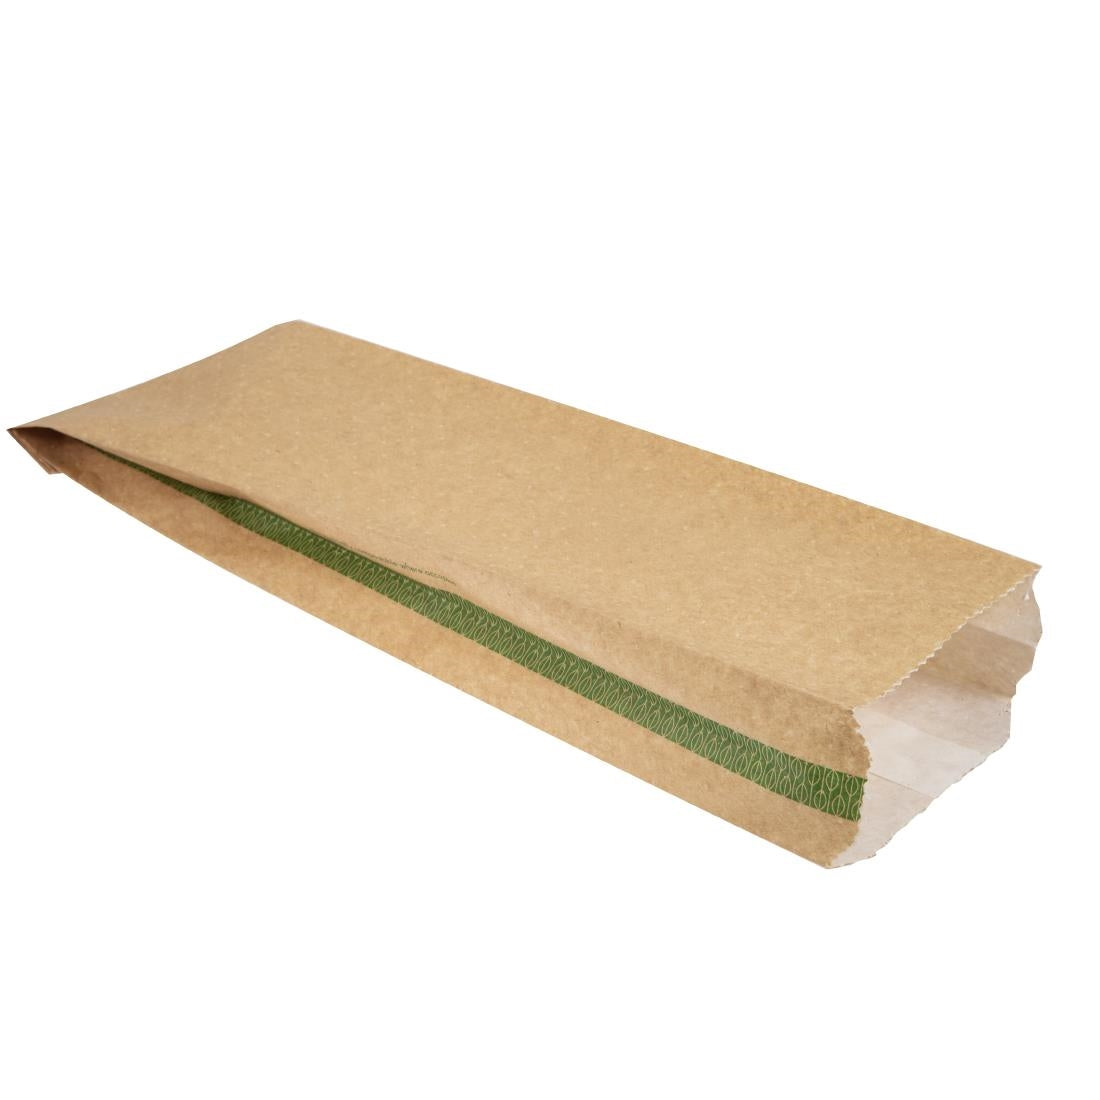 FC897 Vegware Compostable Therma Paper Hot Food Bags (Pack of 500)